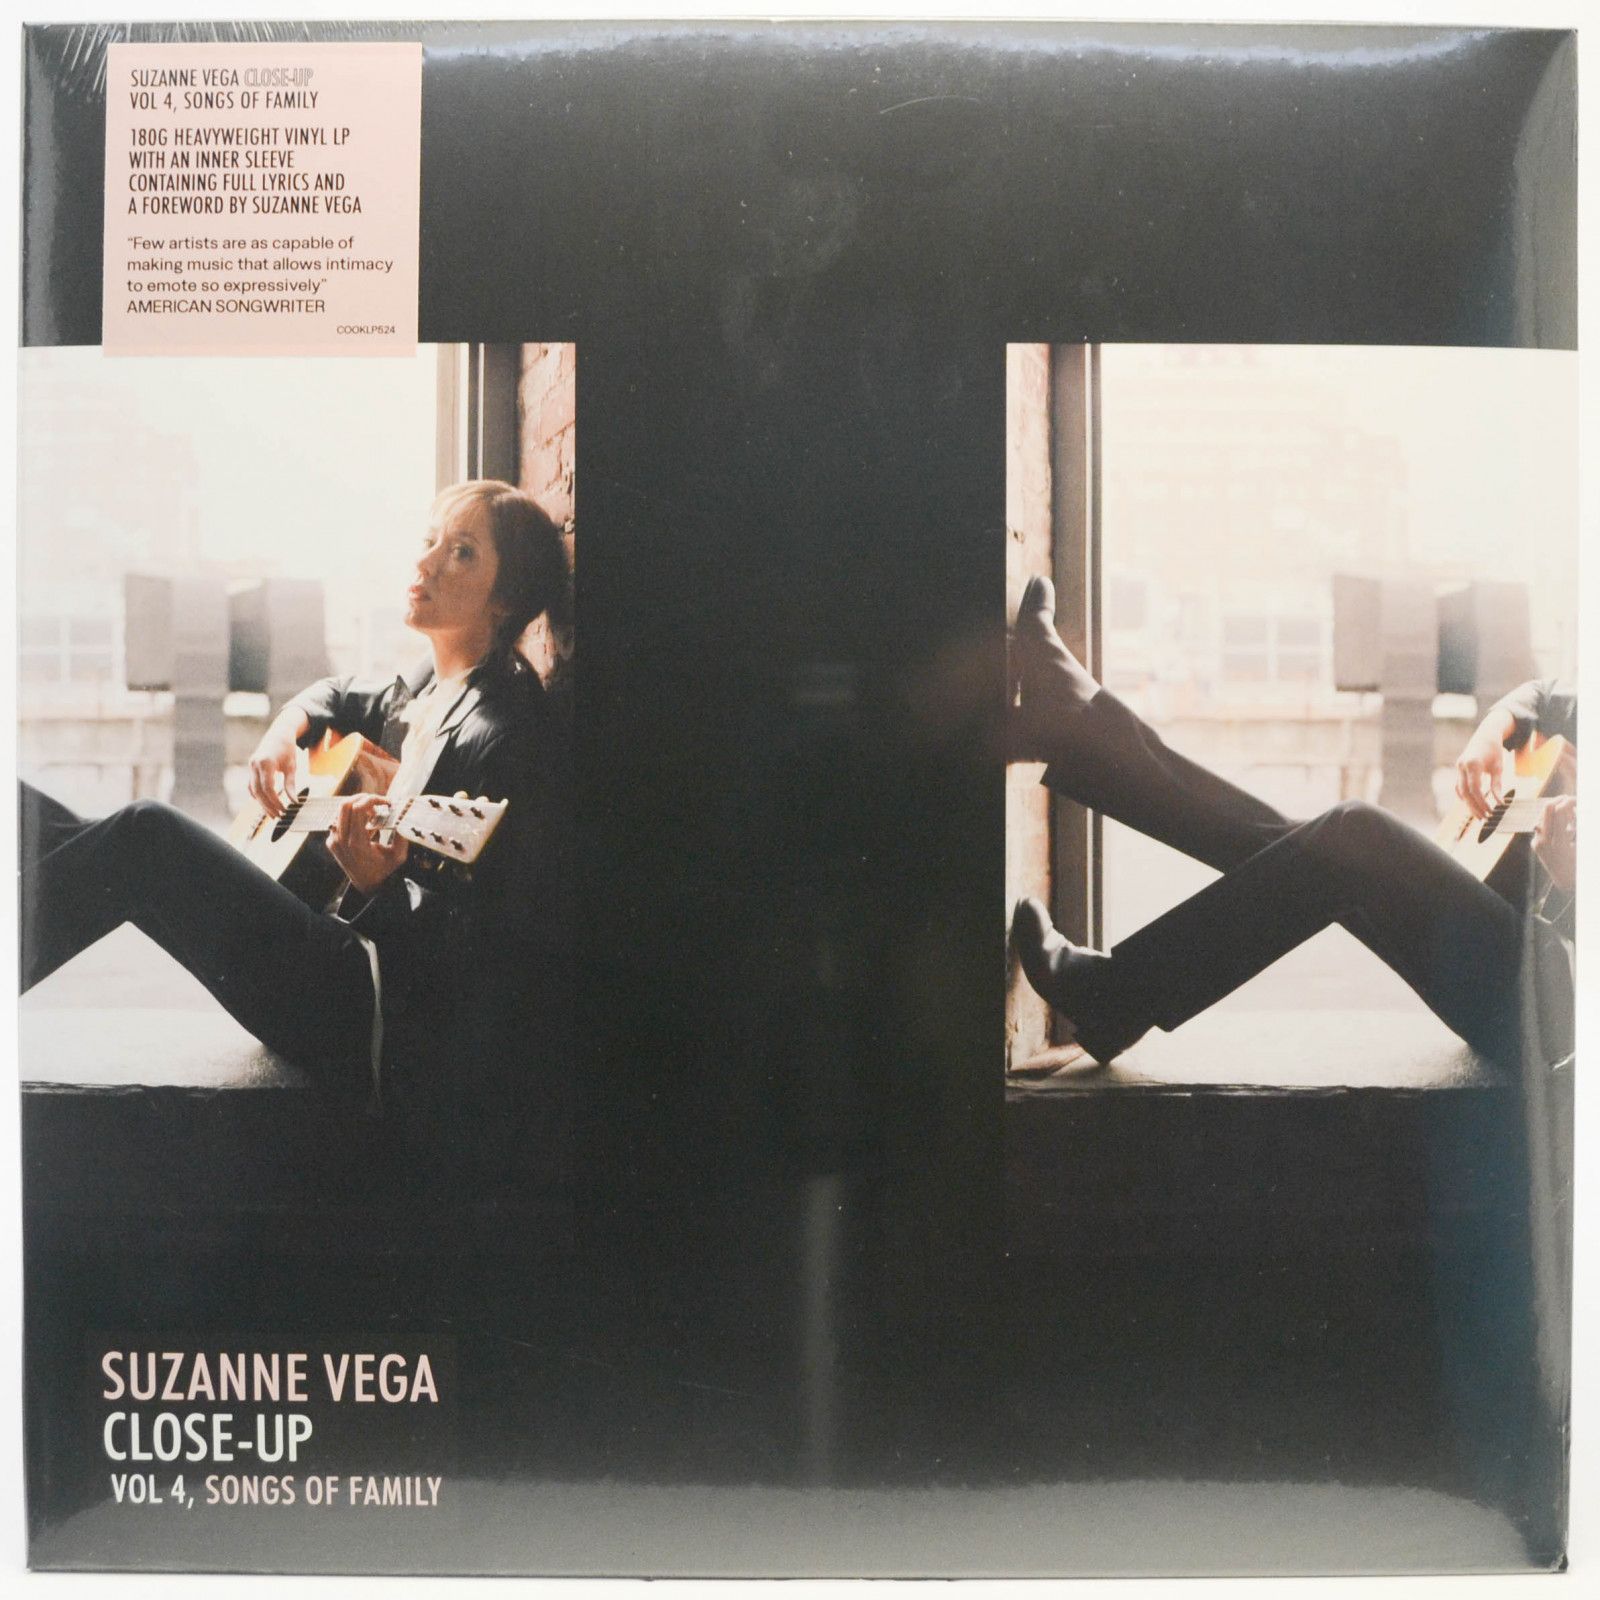 Suzanne Vega — Close-Up Vol 4, Songs Of Family, 2012